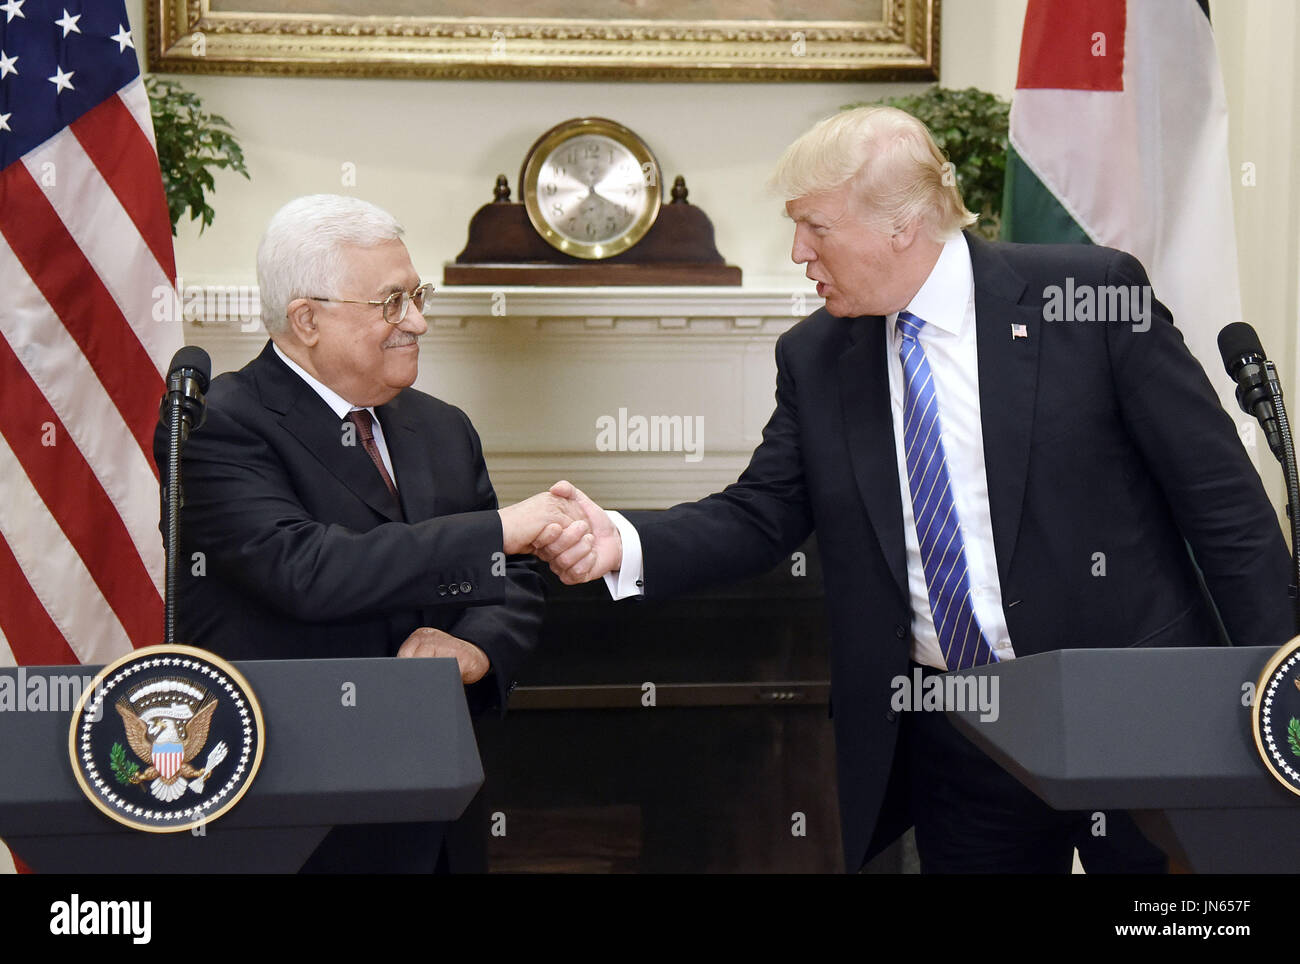 United States President Donald J. Trump shakes hands with President Mahmoud Abbas of the Palestinian Authority after a joint statement in the Roosevelt Room  of the White House in Washington, DC, on May 3, 2017. Photo by Olivier Douliery/ Sipa USA Credit: Olivier Douliery / Pool via CNP Stock Photo